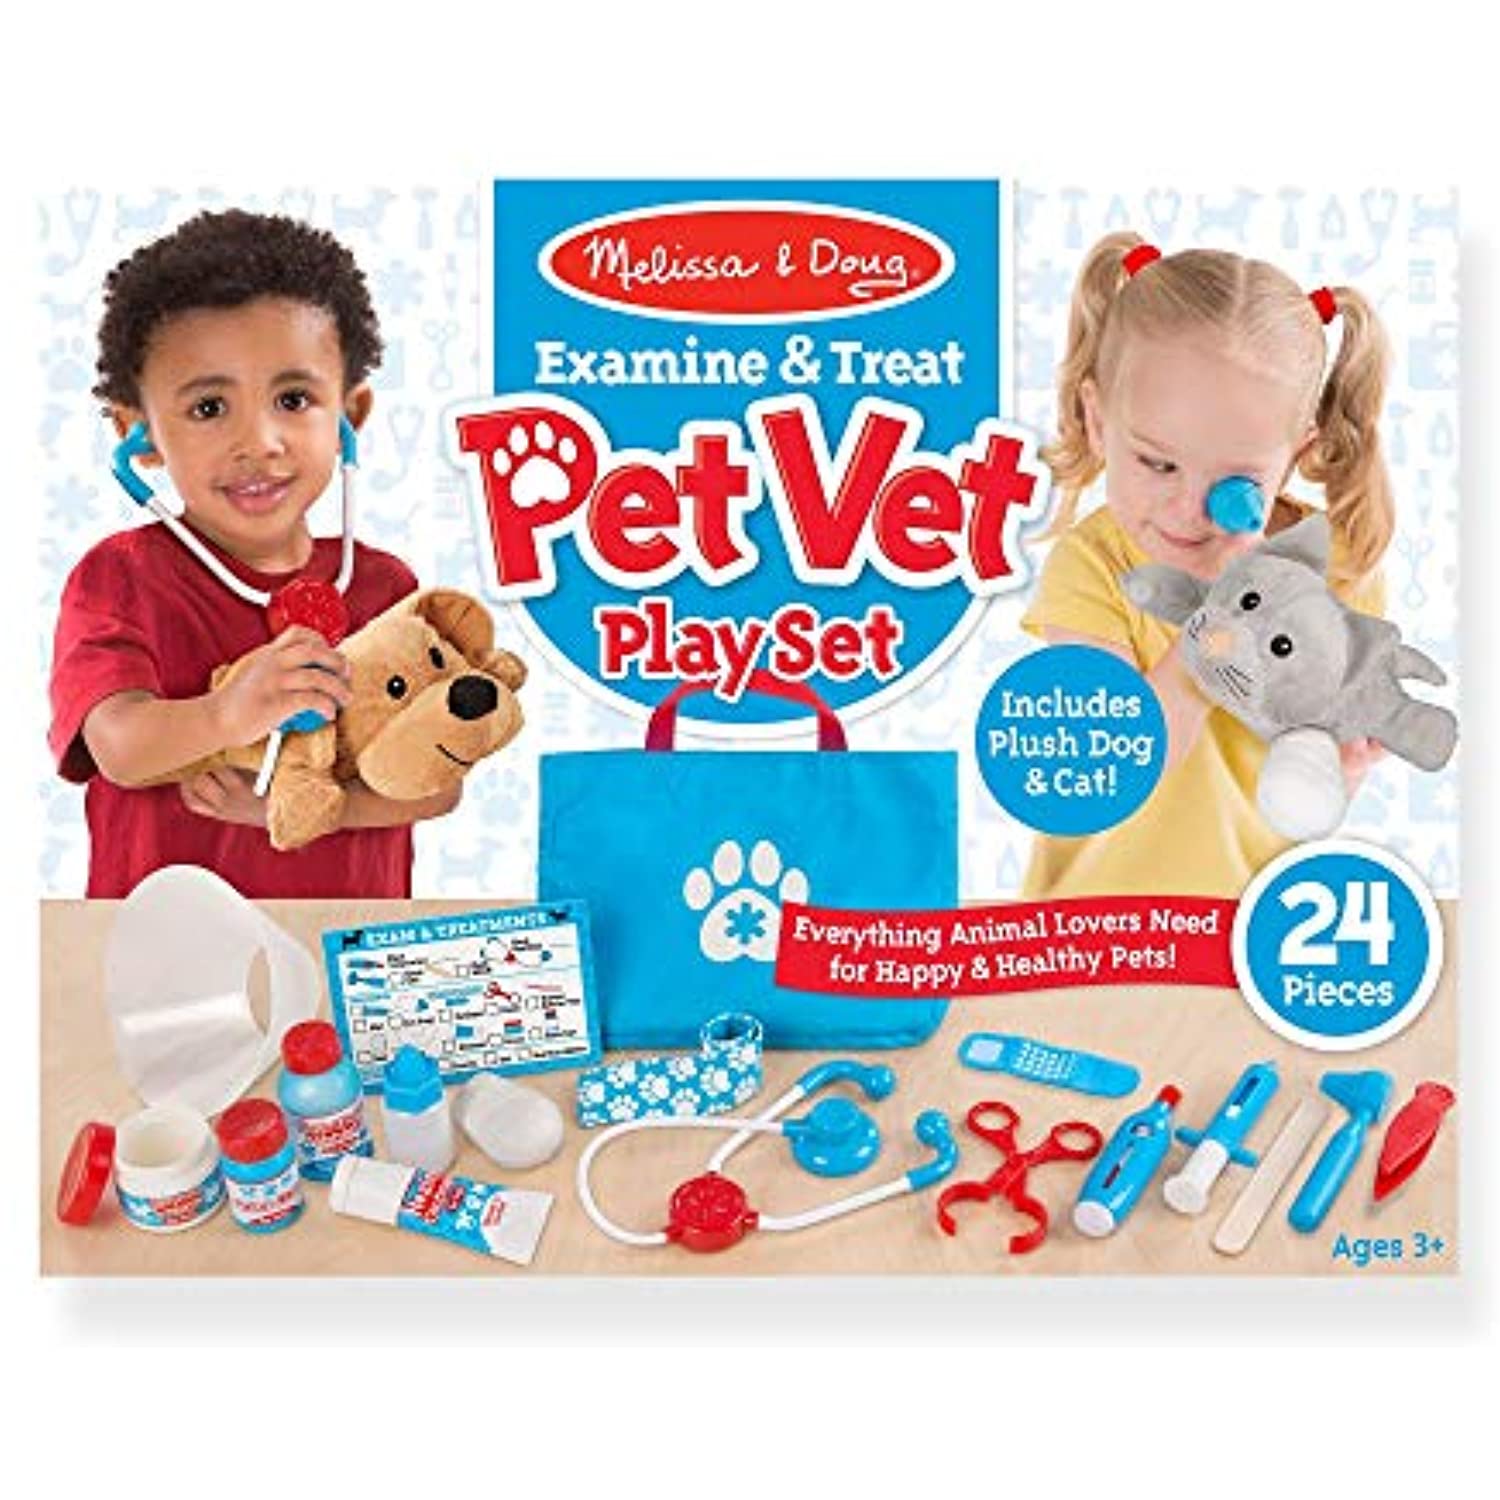 Melissa and Doug LCI8520 Examine and Treat Pet Vet Play Set, 24 Pieces, Complete Toys Set with Plush Dog and Cat, Sold as 1 Set